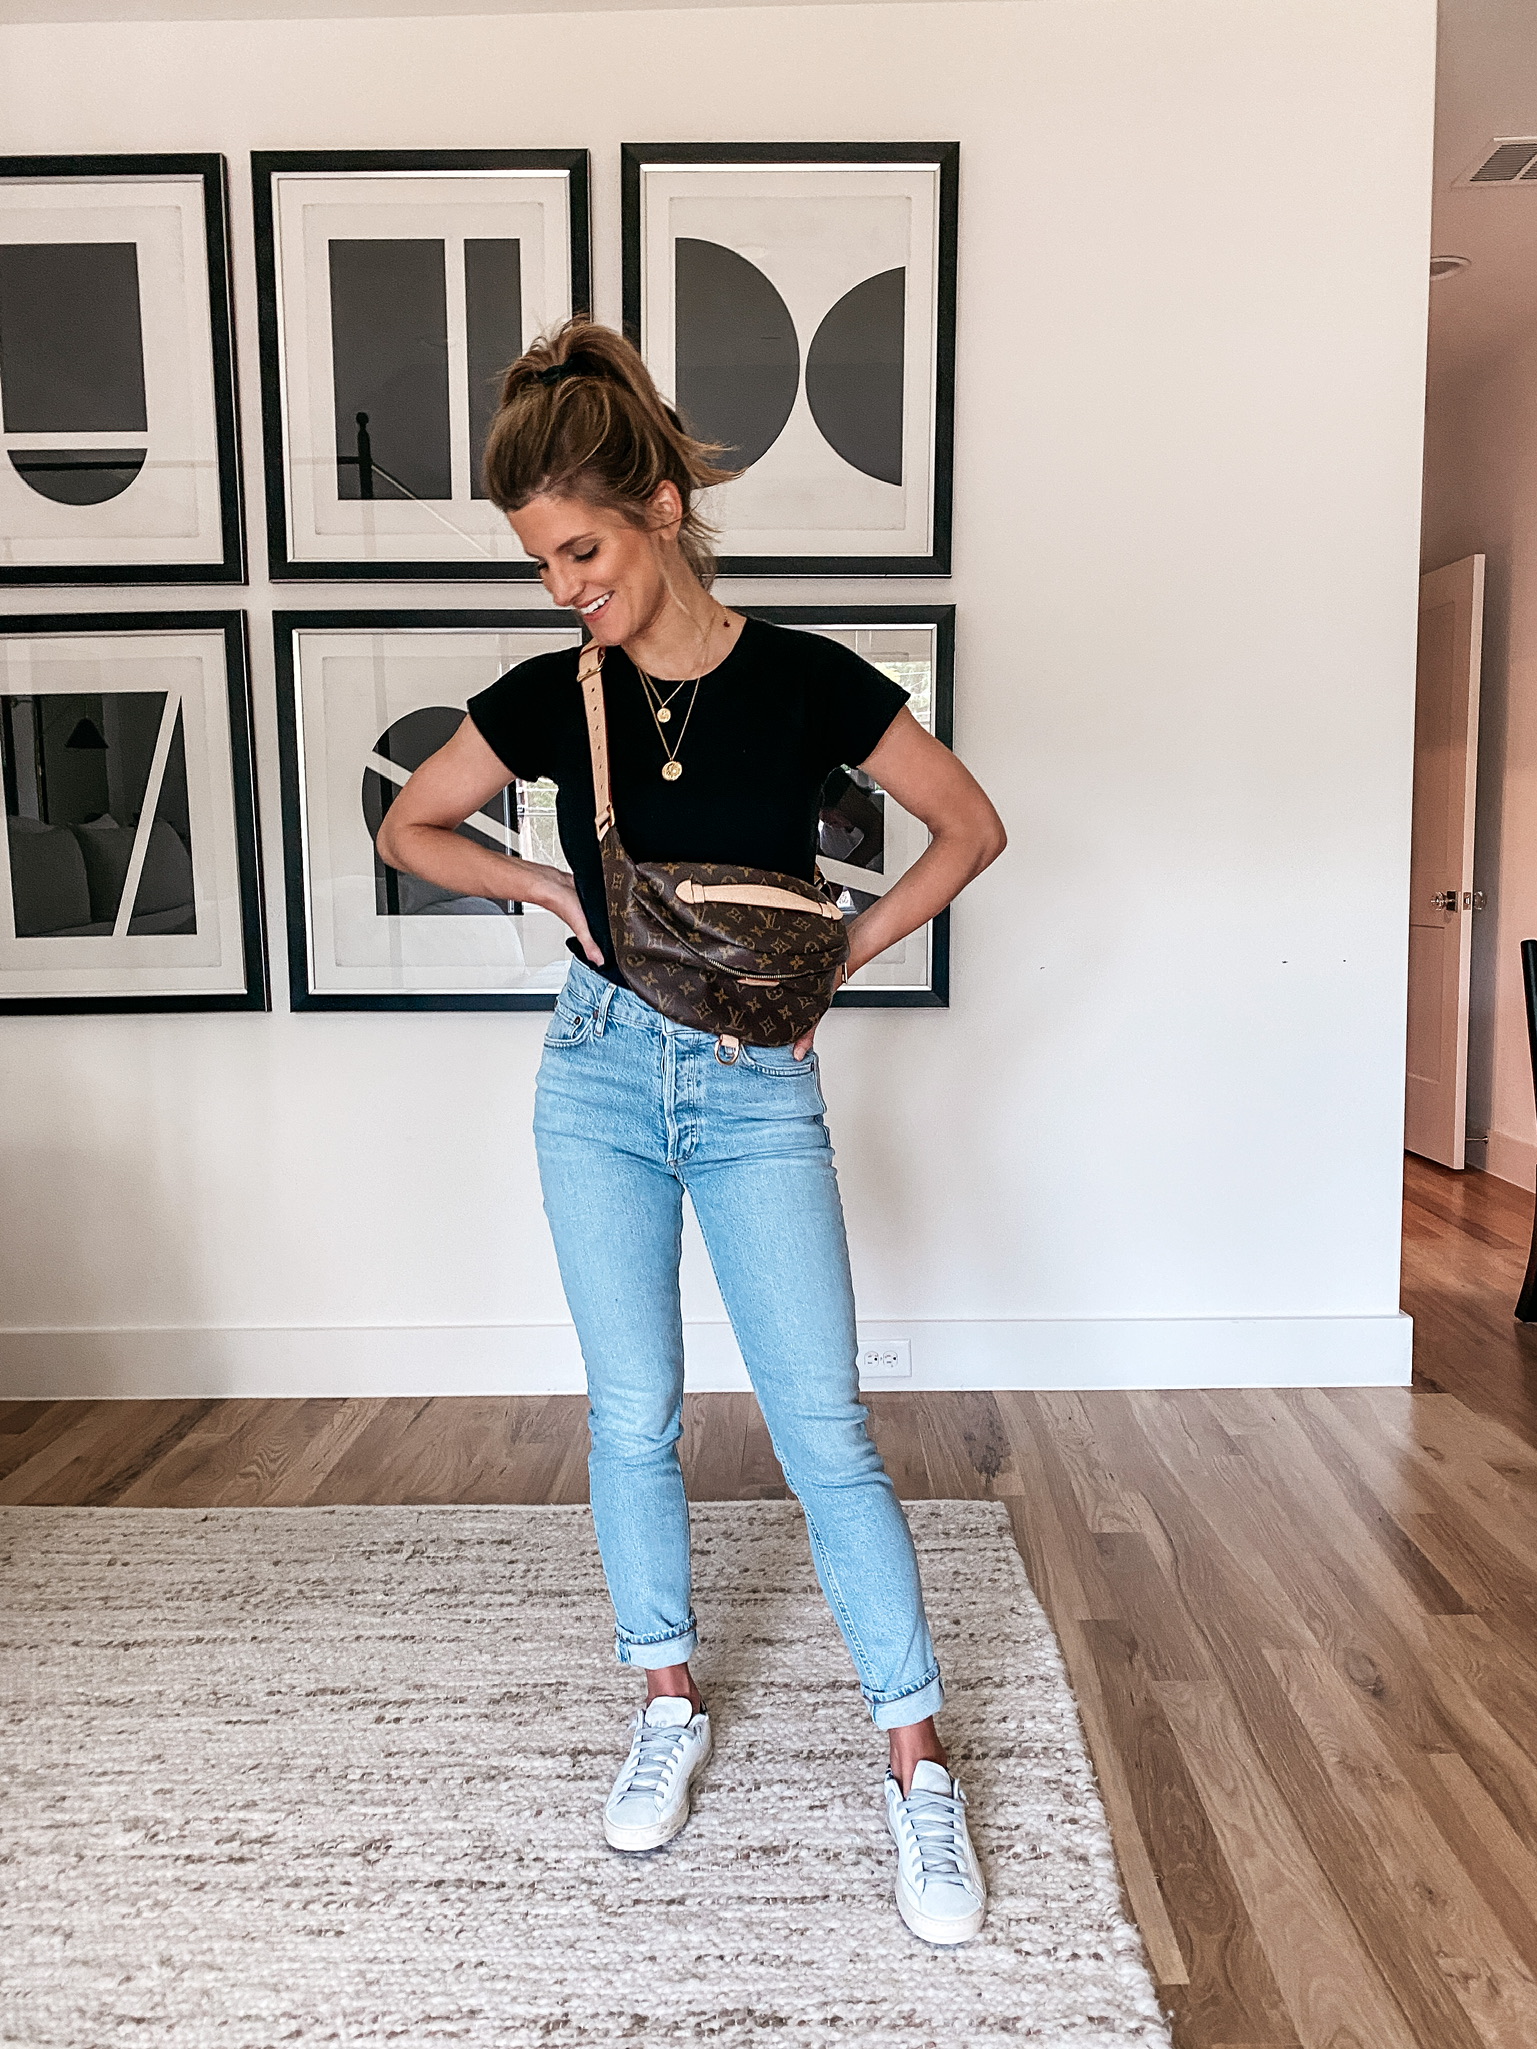 Brighton Butler wearing high rise straight jean, madewell black tee, and Louis Vuitton bag